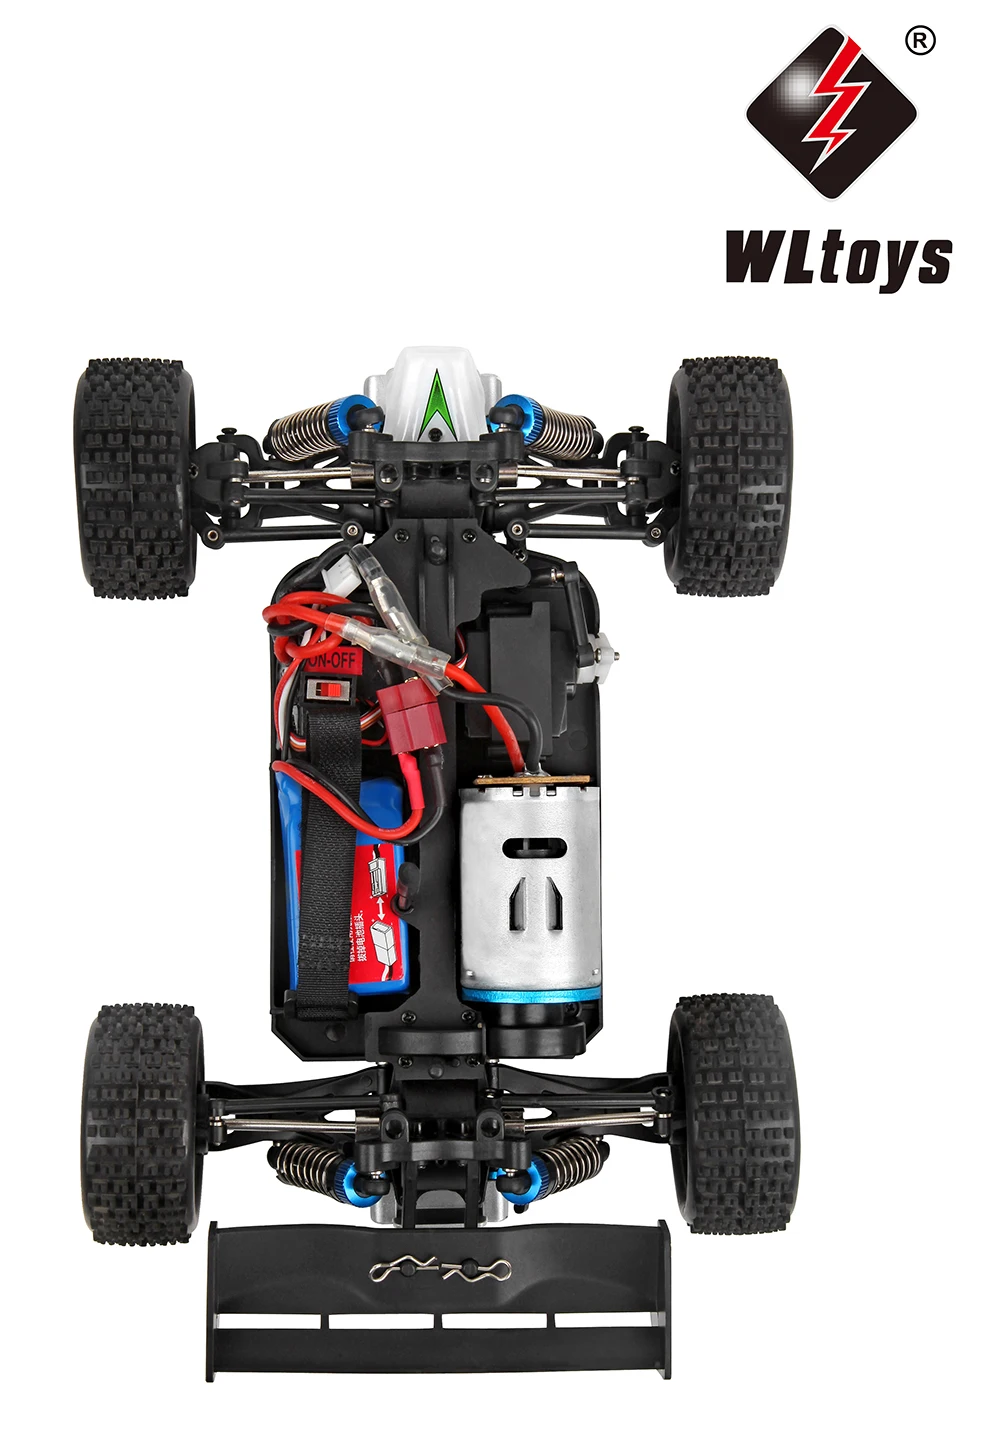 WLtoys A959 959B 2.4G Racing RC Car 70KM/H 4WD Electric High Speed Car Off-Road Drift Remote Control Toys for Children enlarge